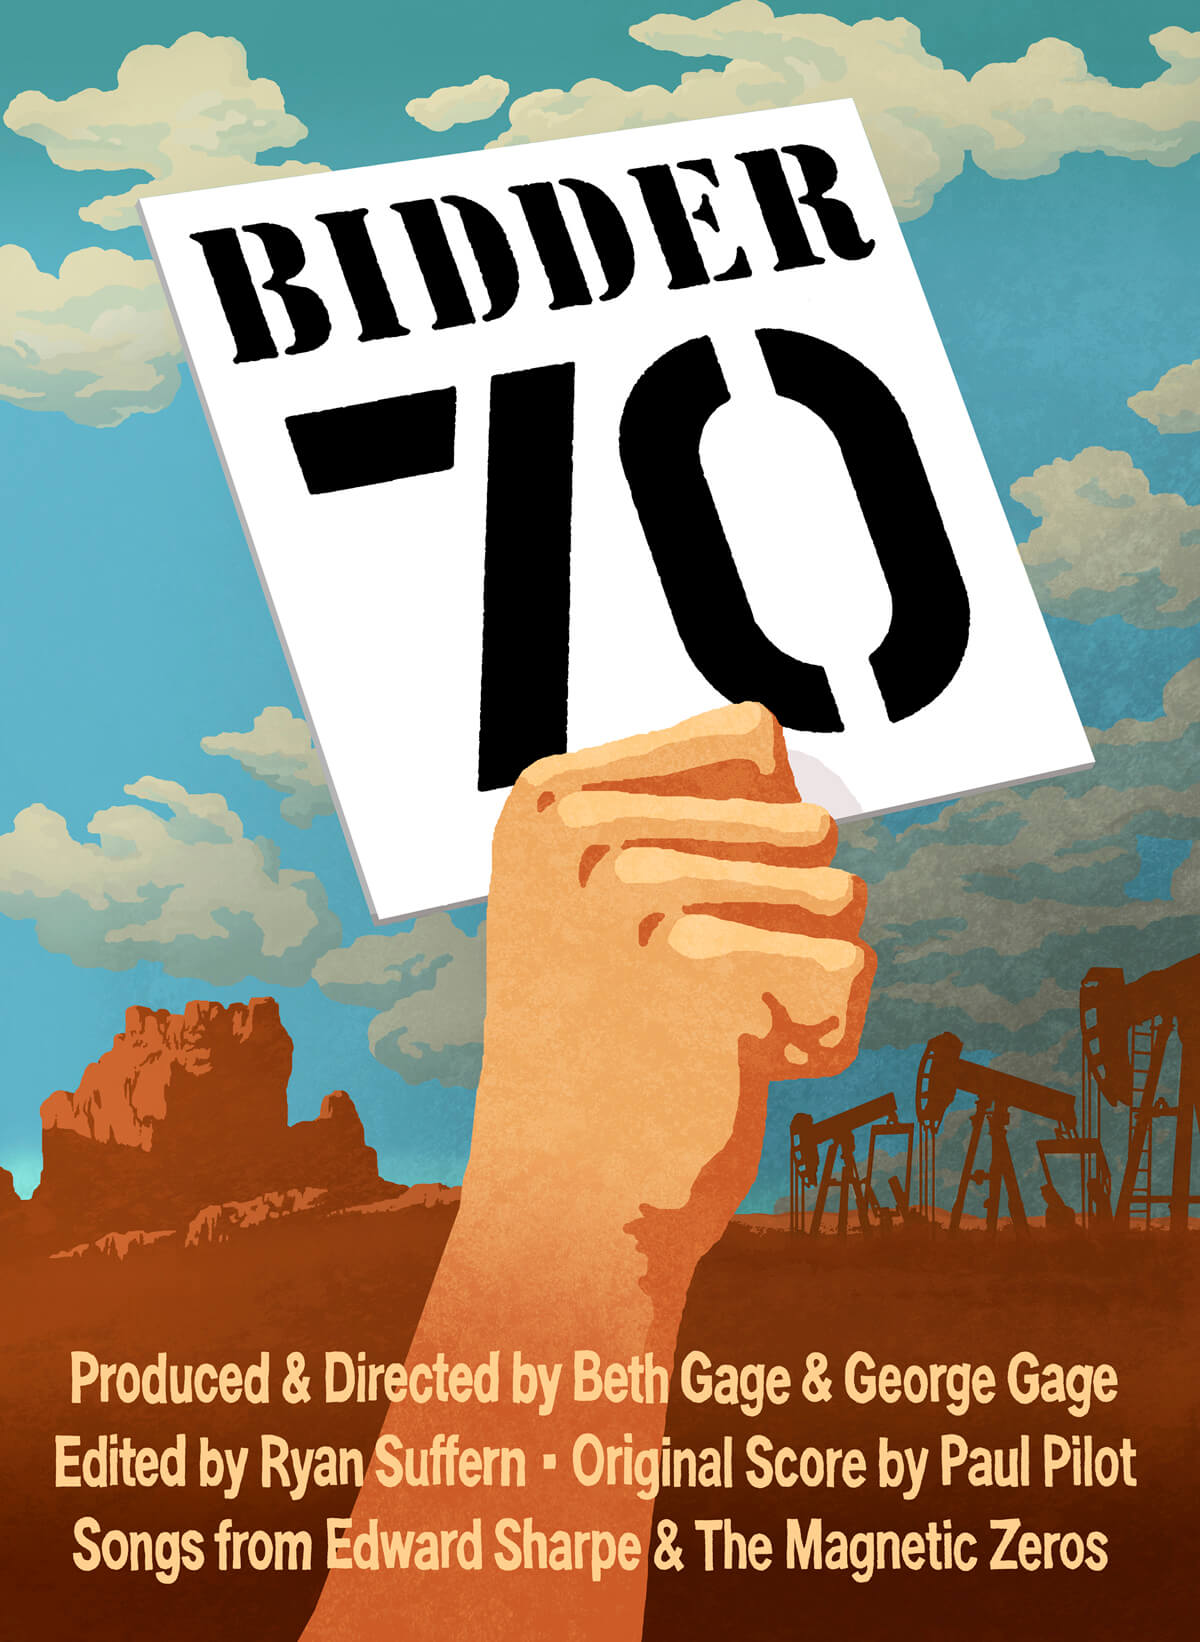 A graphic of a hand holding a sign that says "Bidder 70". The background is an open blue sky with a steel mill in brown.